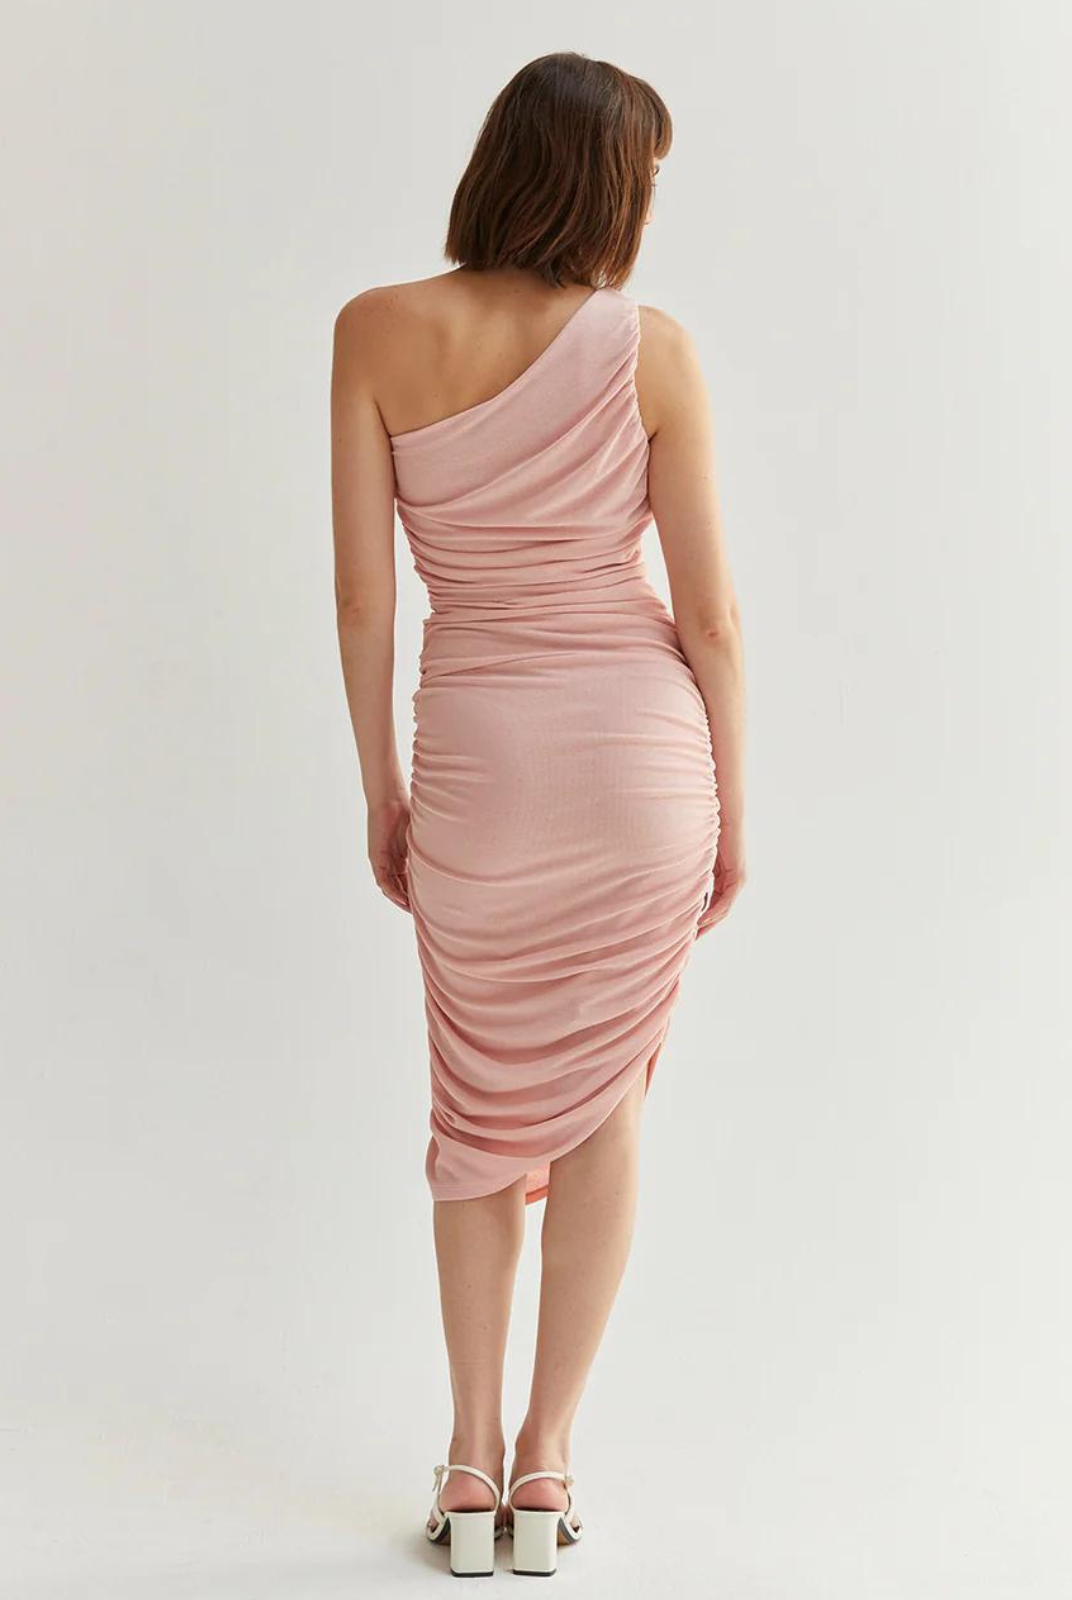 Vienna Knit Dress.The Vienna Knit Dress features a one shoulder construction, ruching detail on both sides, asymmetric hemline, and invisible zipper on the side. Designed for a midi length with fit to bodice silhouette.